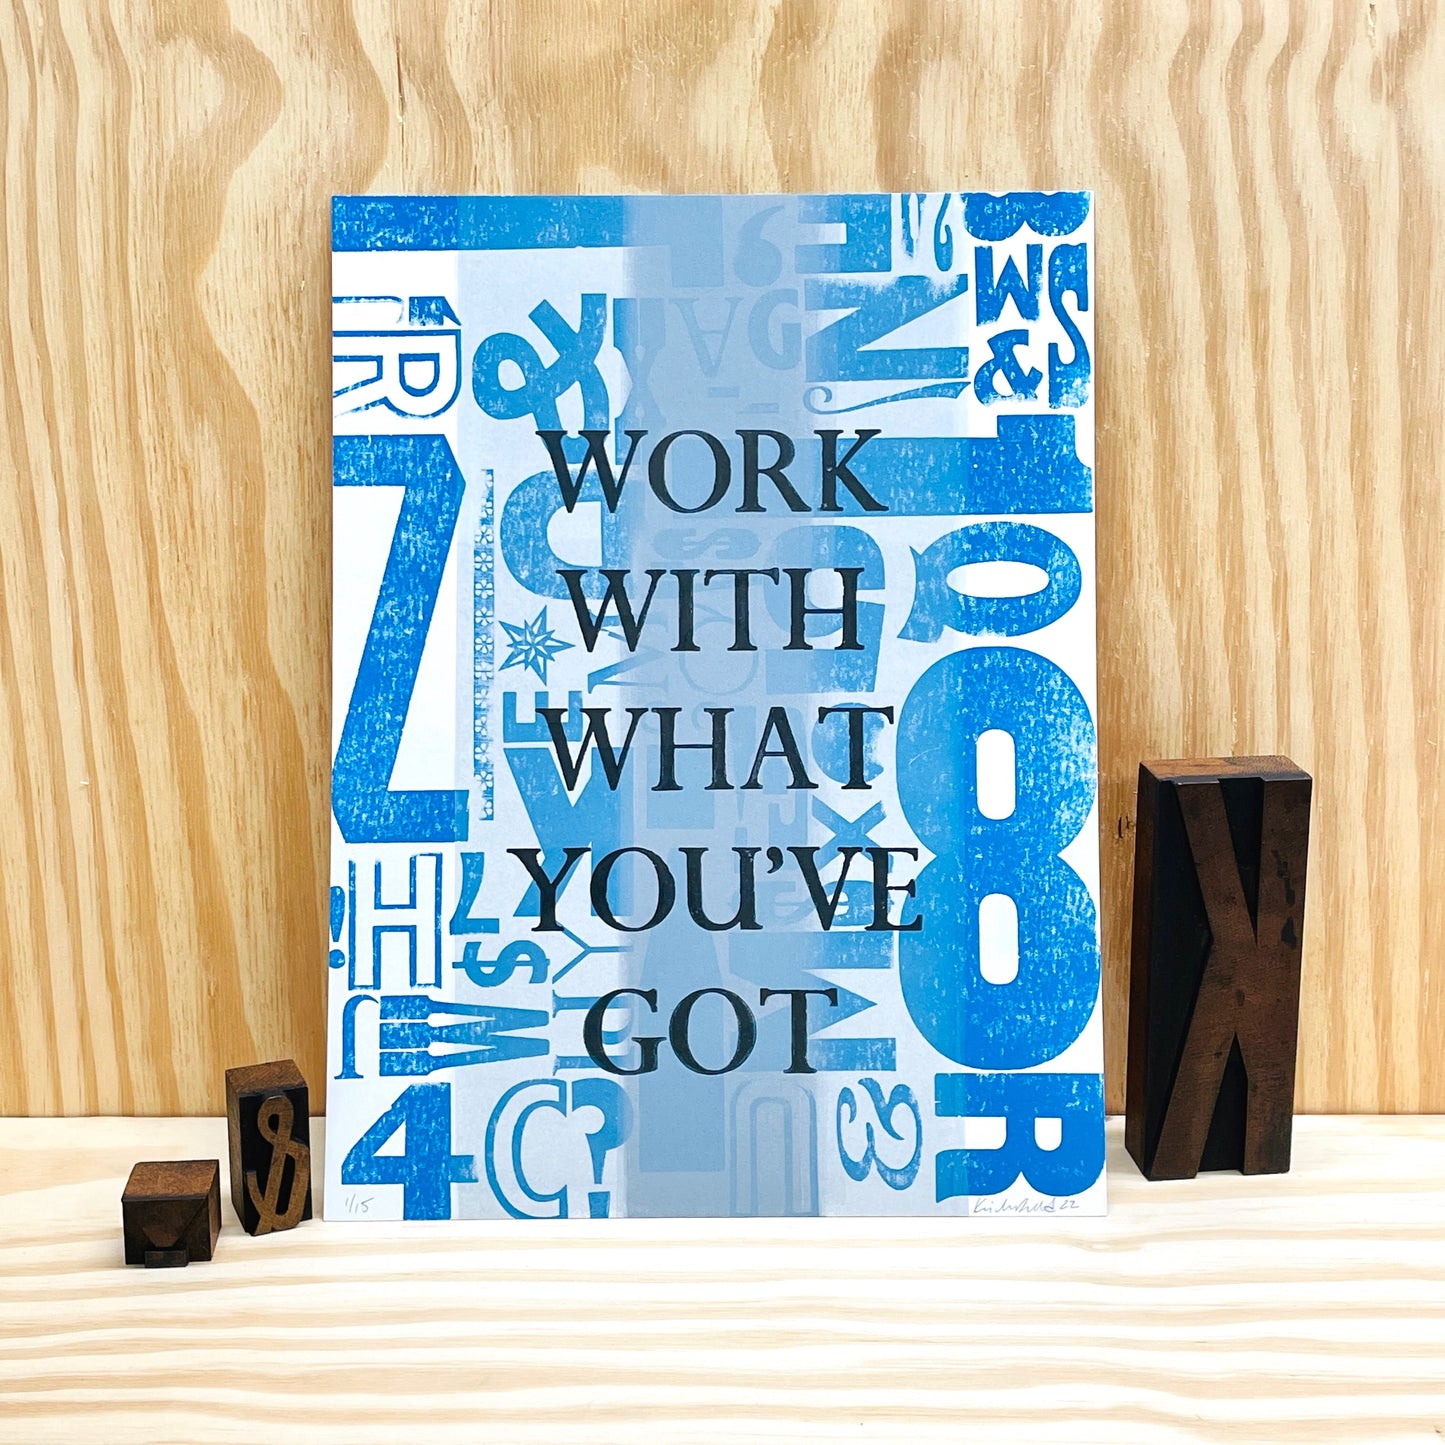 Work With What You've Got - Wood Type Letterpress Quote (9x12")